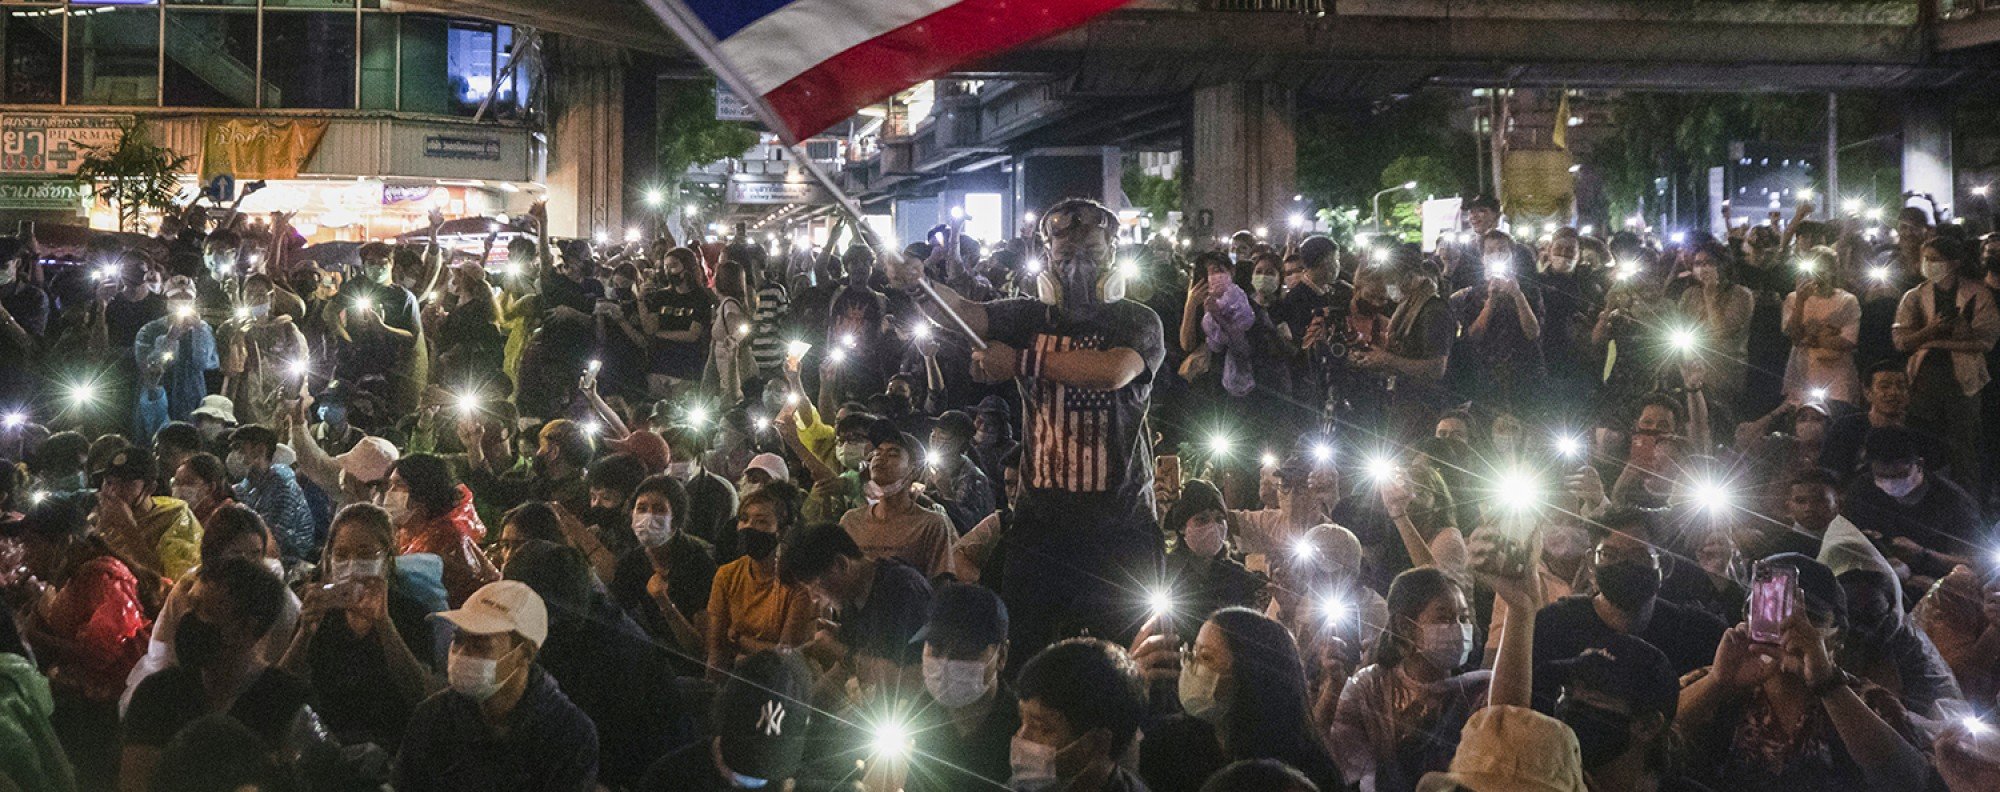 Pro-democracy protesters waves Thailand national flag as others shine their mobile phone lights during an anti-government protest in Bangkok, Thailand. Photo: AP